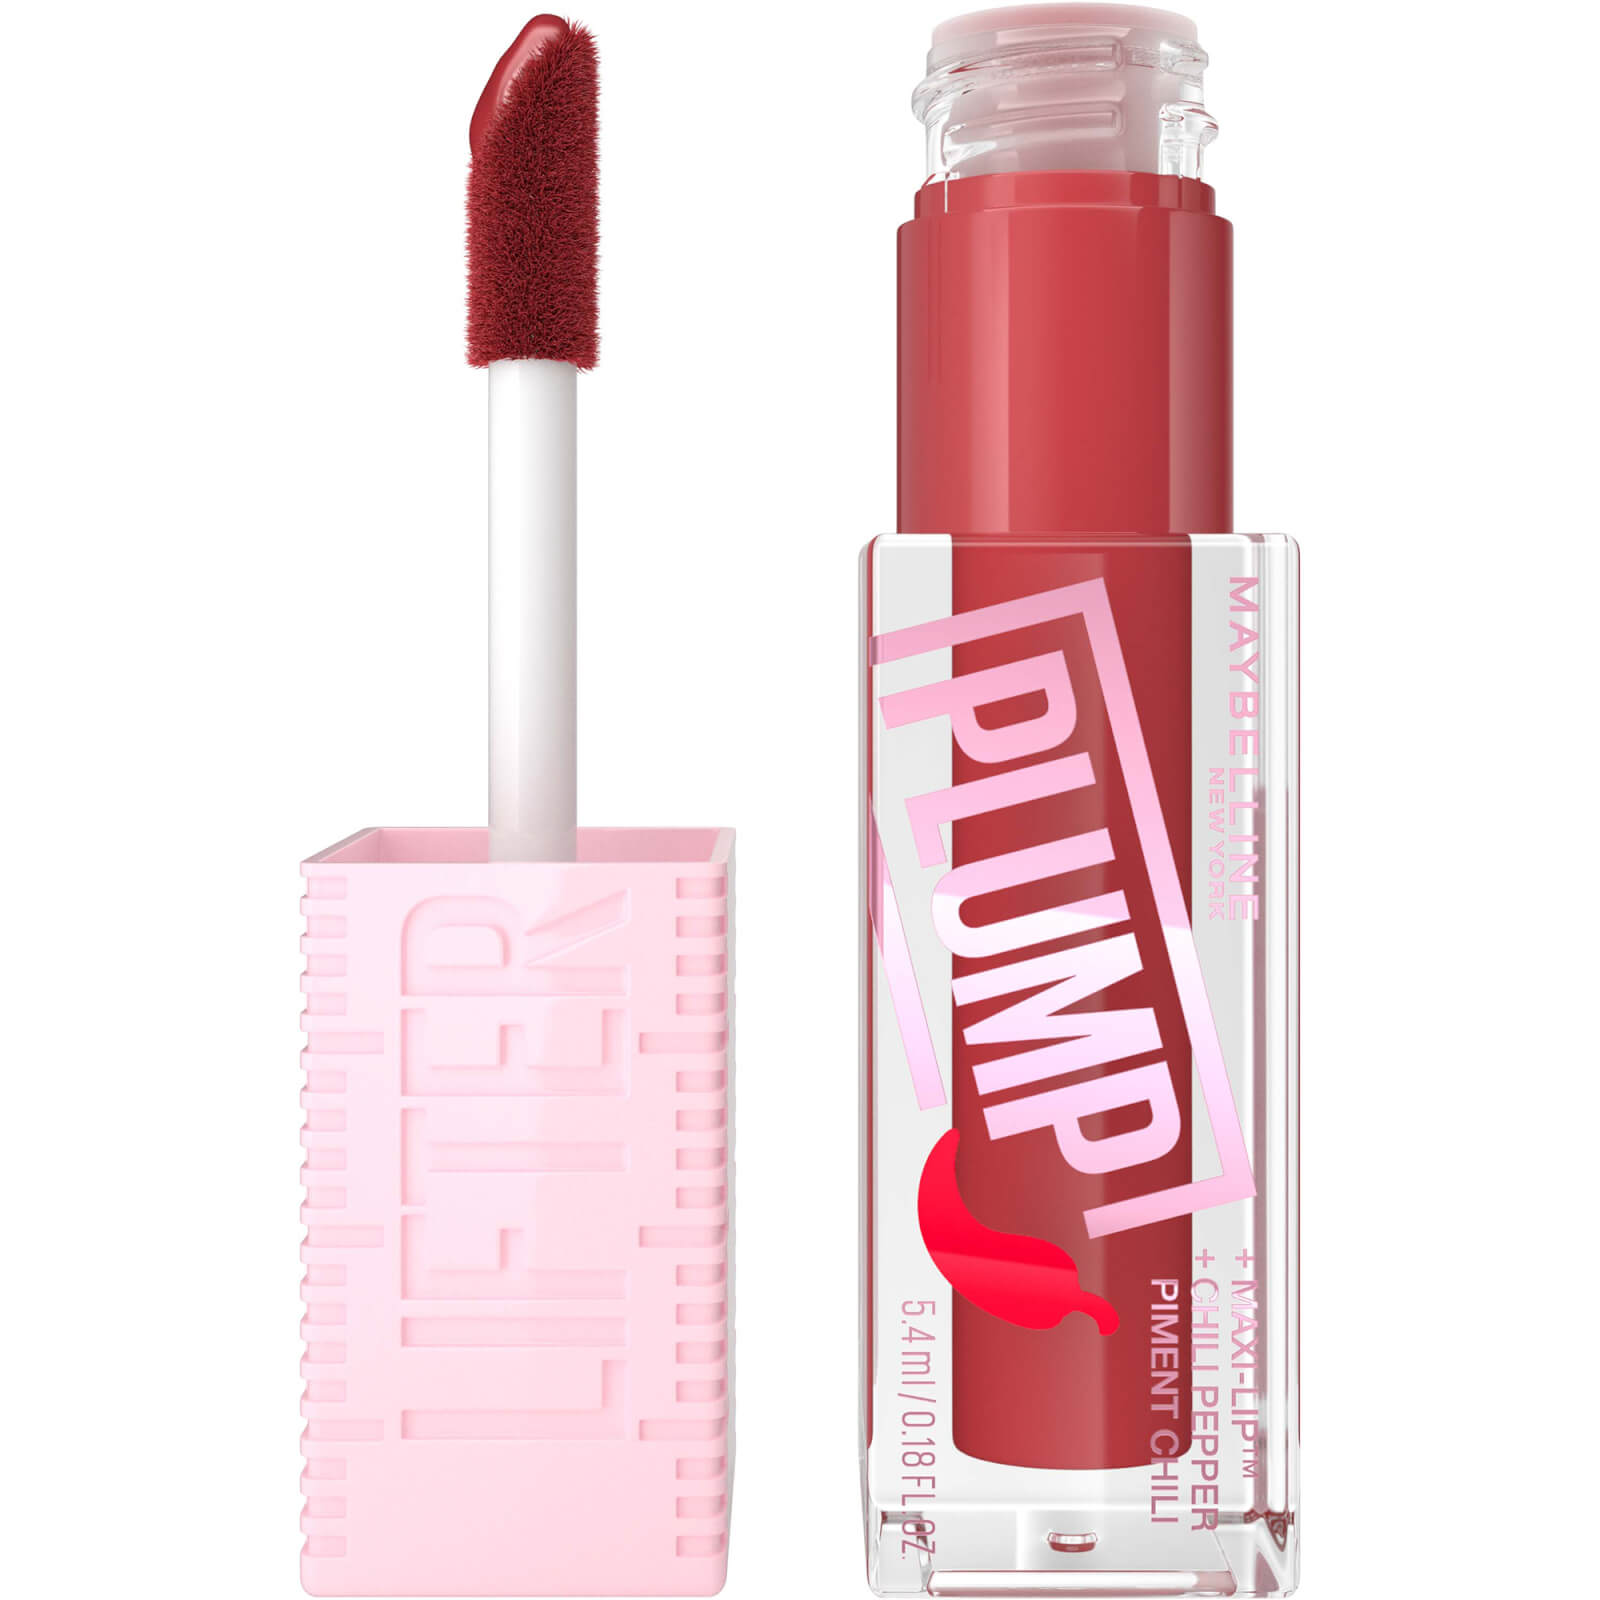 Image of Maybelline Lifter Gloss Plumping Lip Gloss Lasting Hydration Formula With Hyaluronic Acid and Chilli Pepper (Various Shades) - Hot Chilli